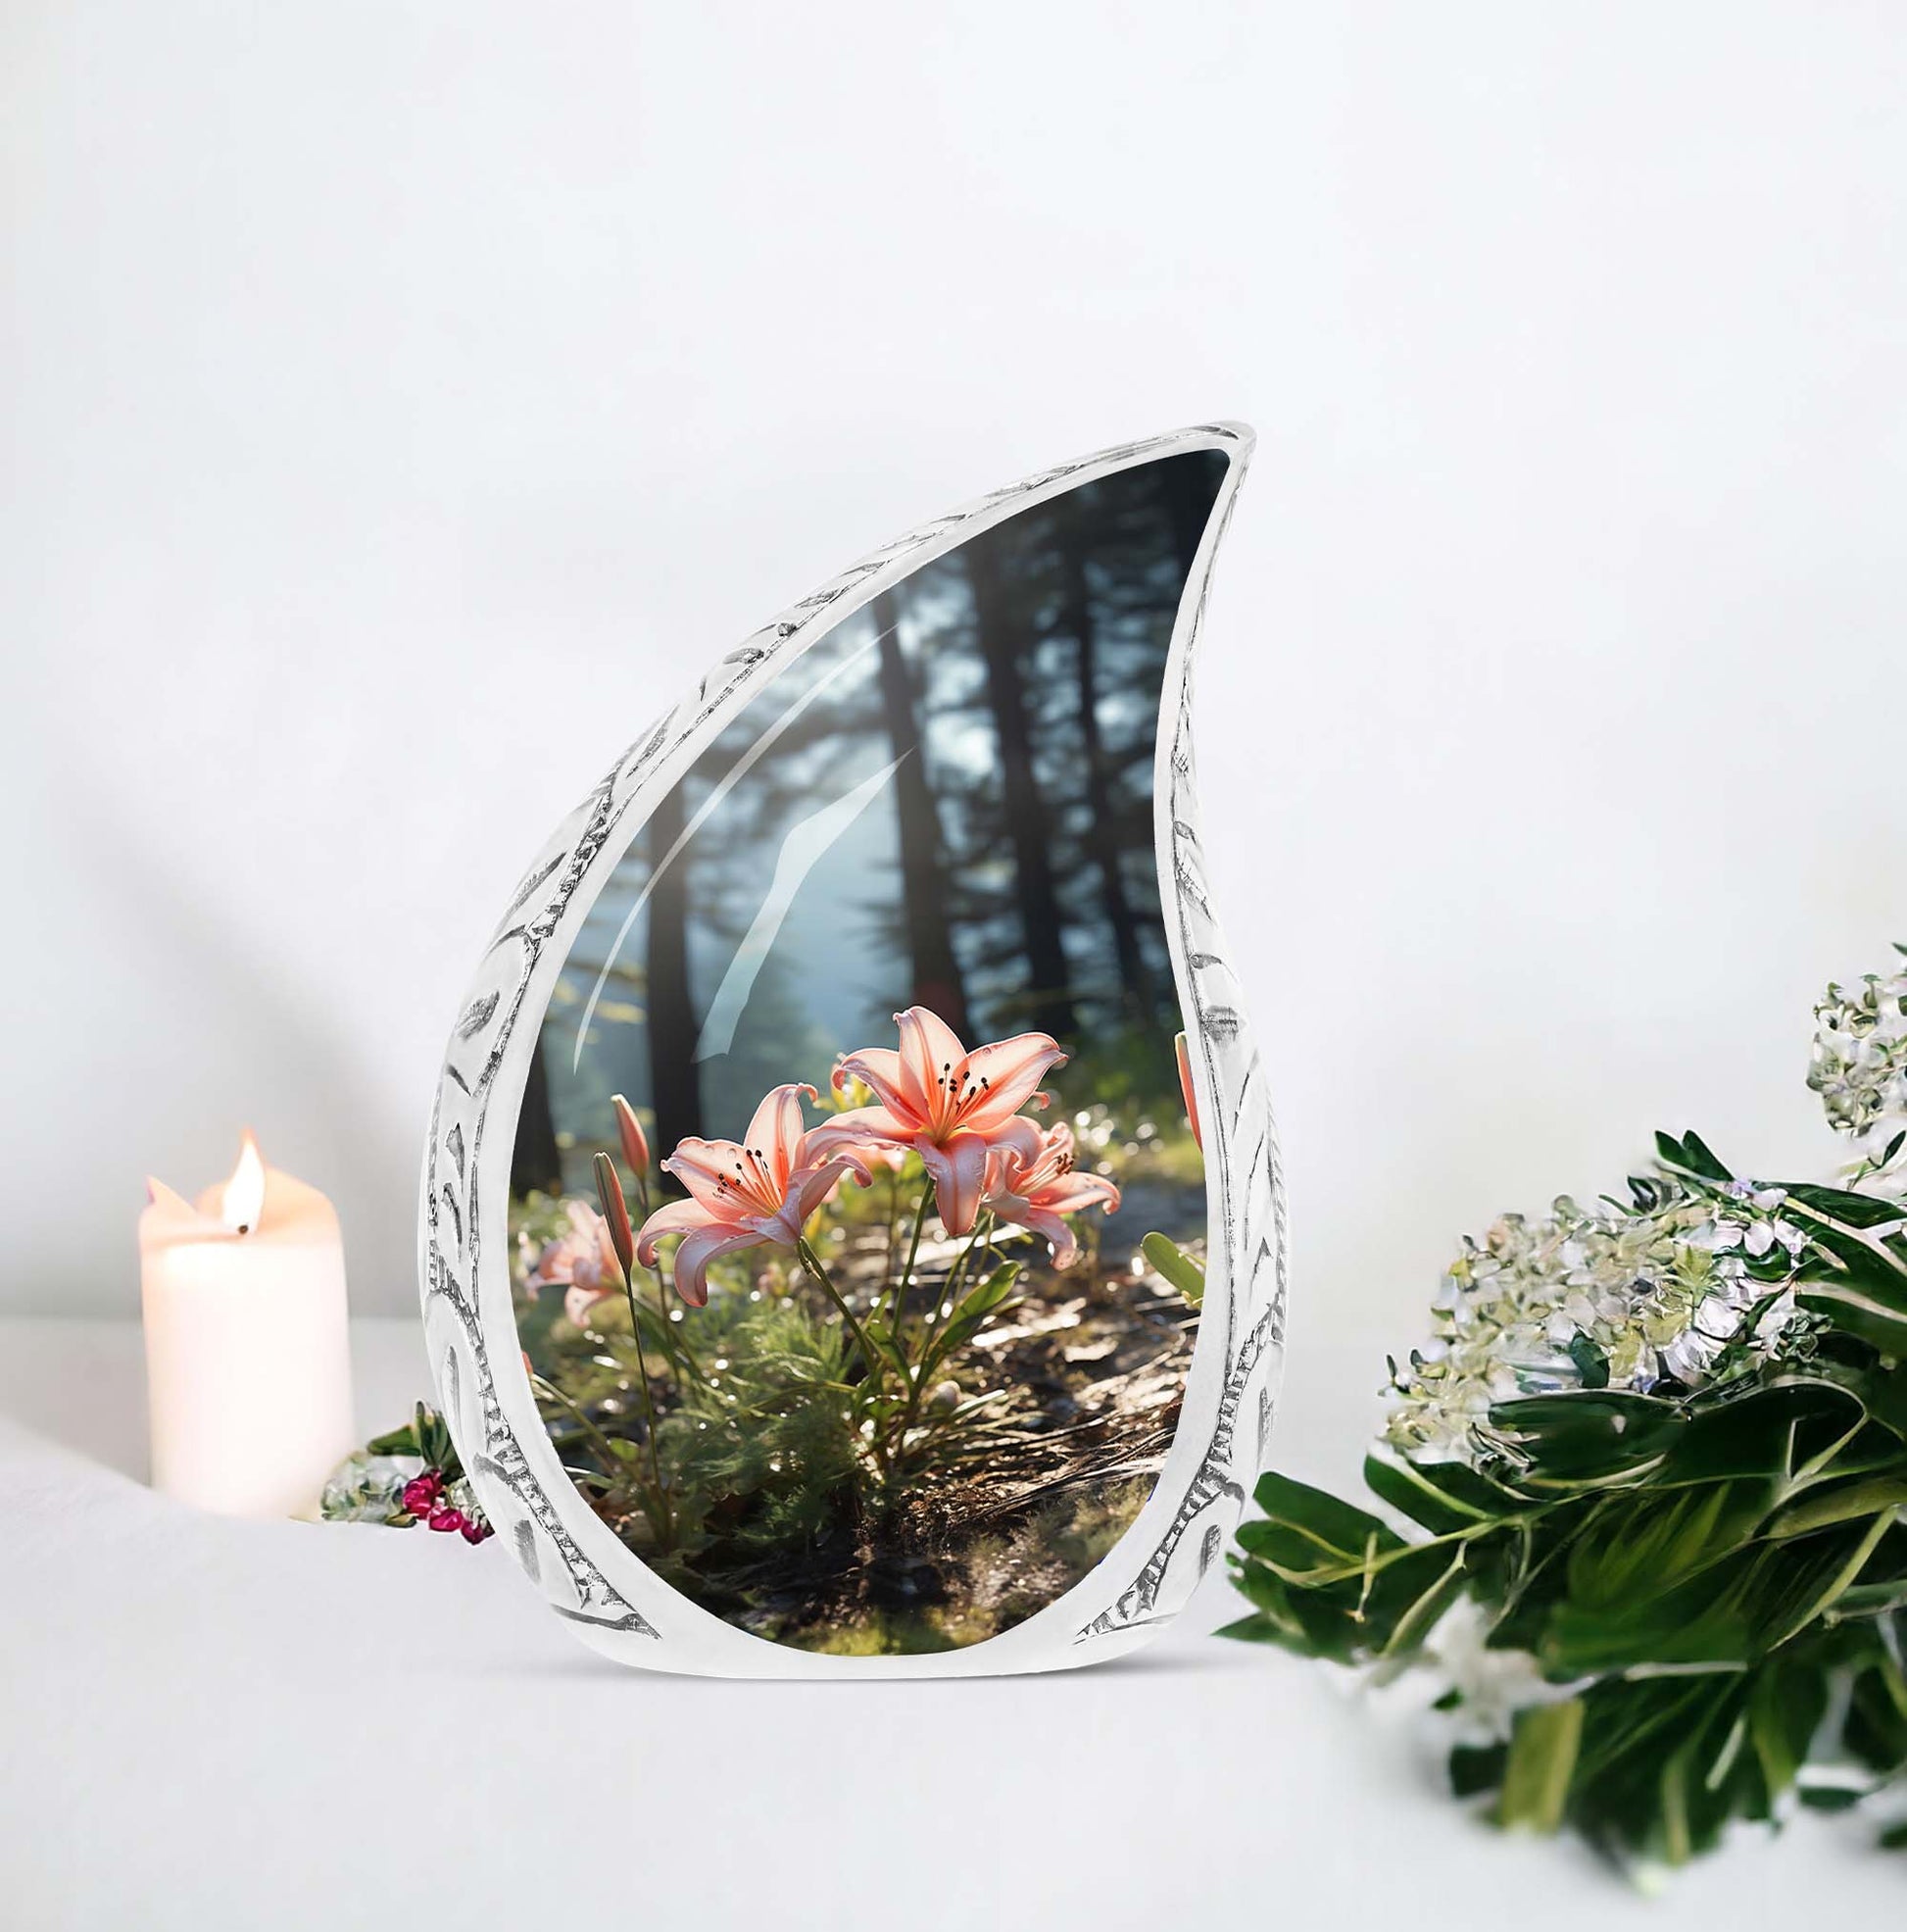 Large cremation urn with pink lily design for adult human ashes in a forest setting